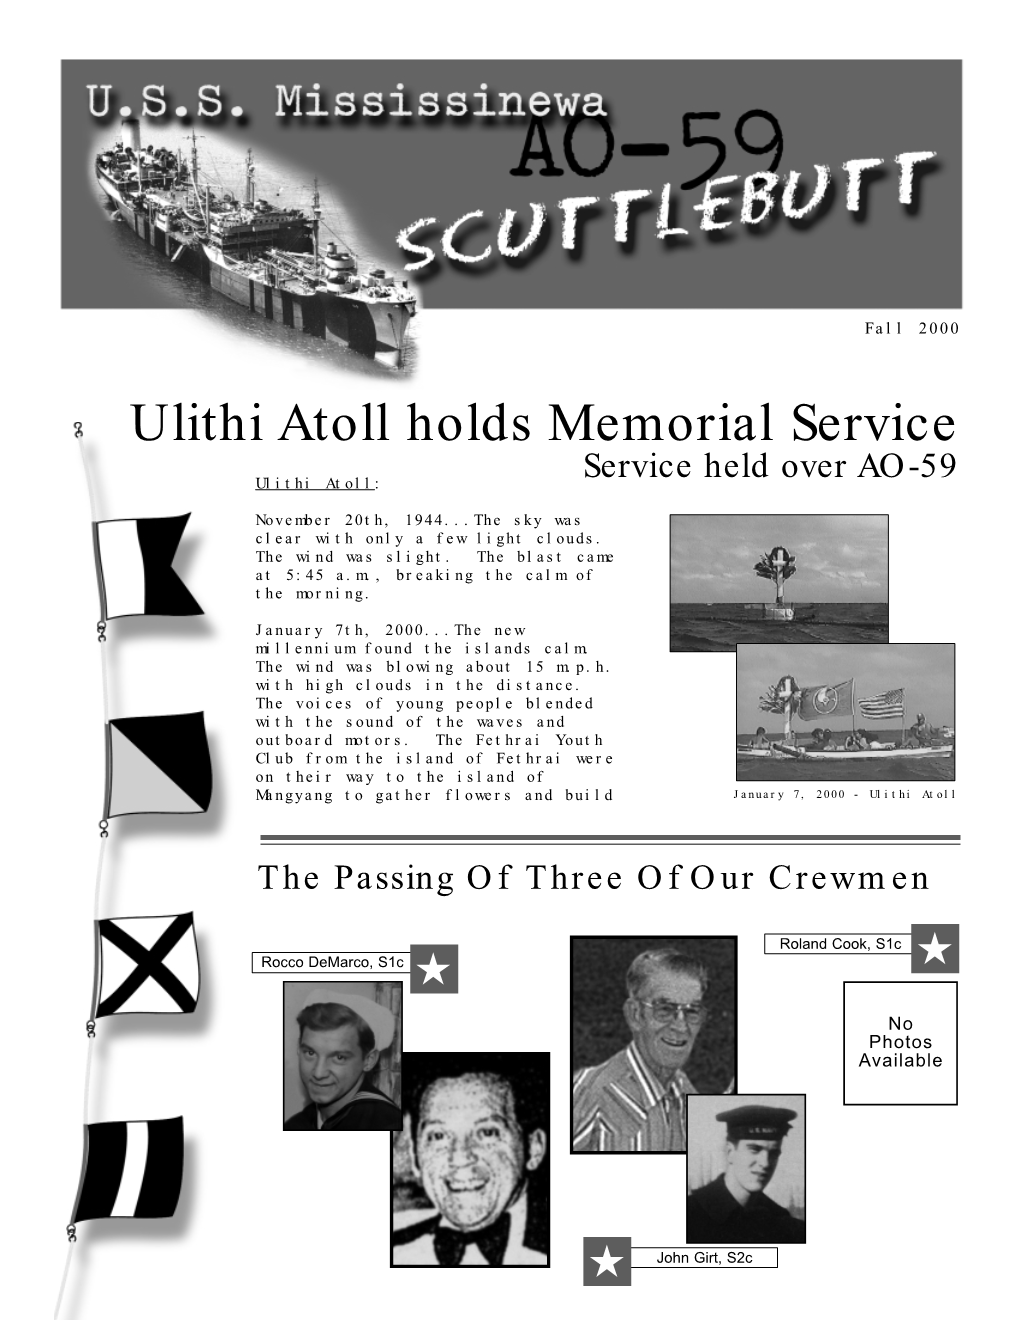 Ulithi Atoll Holds Memorial Service